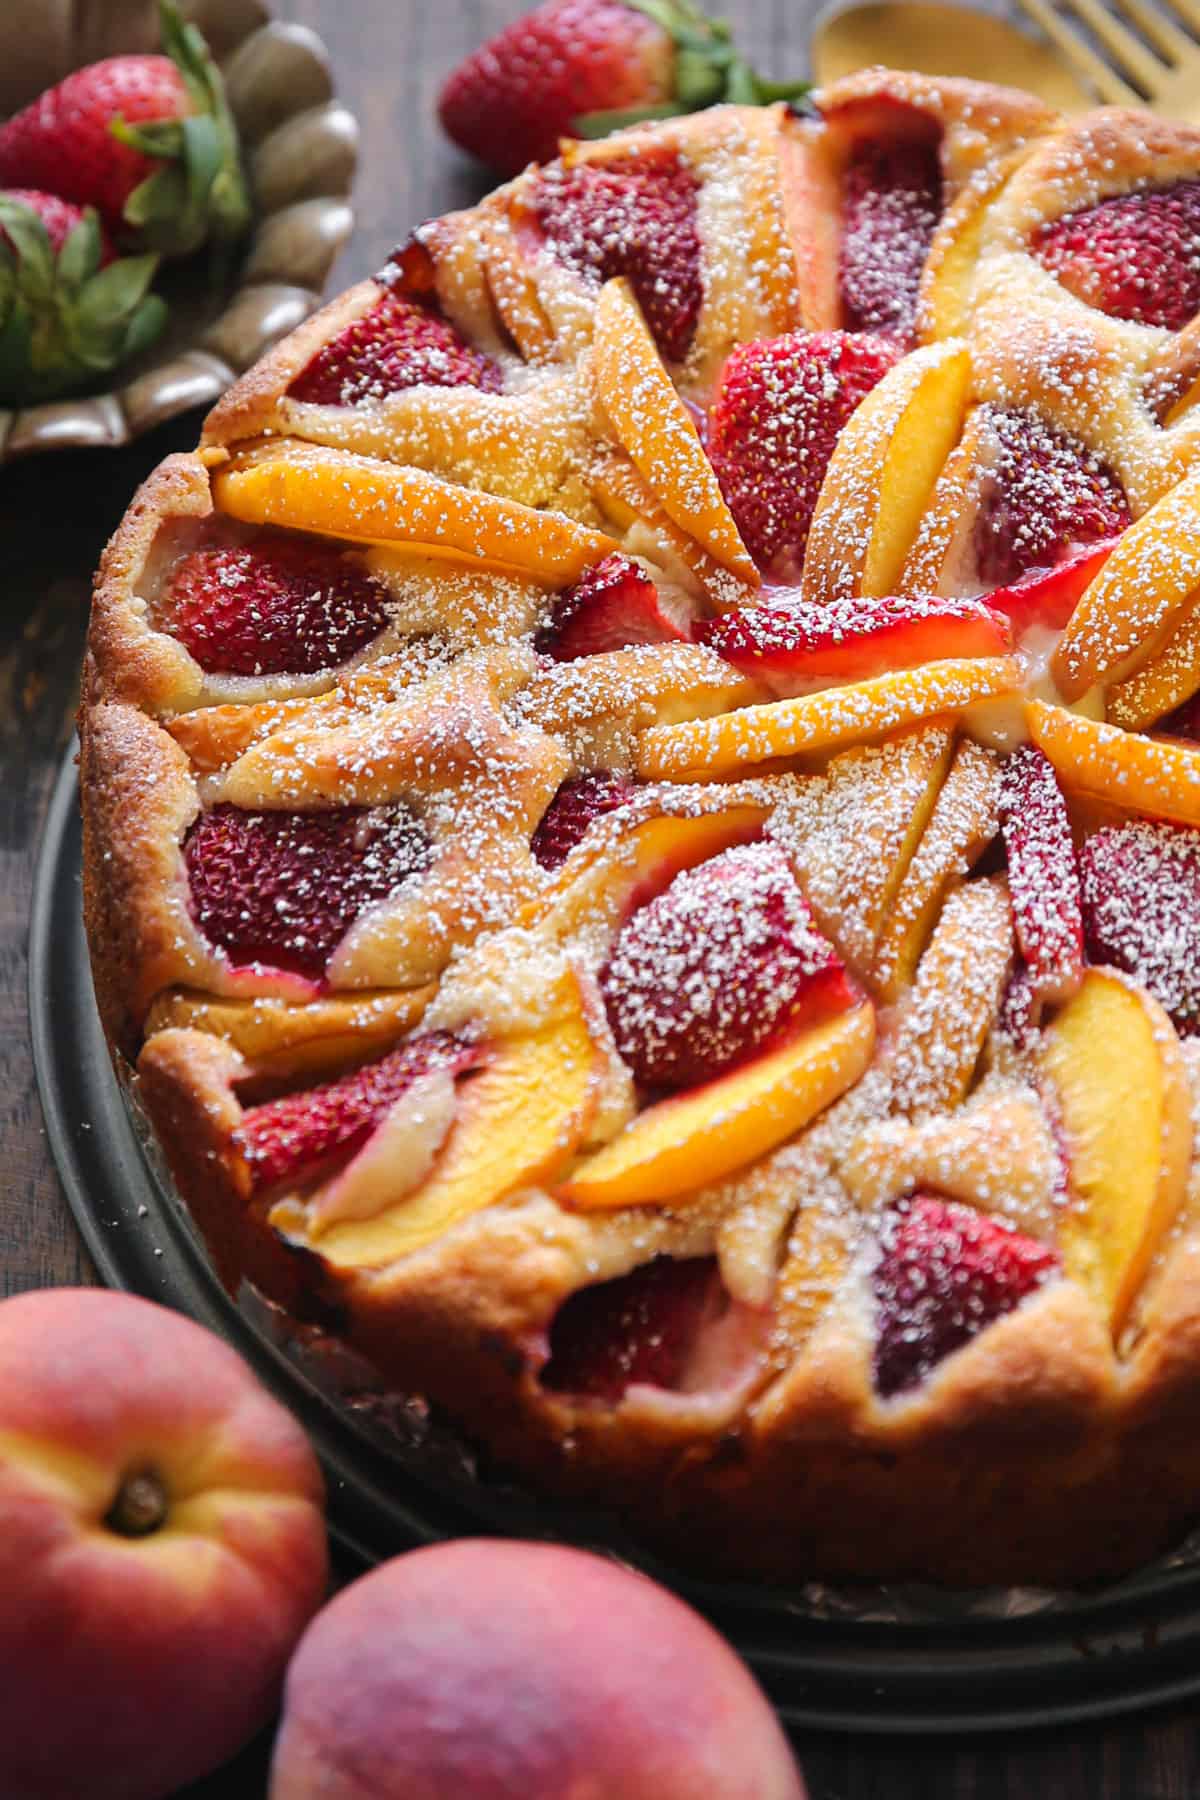 Strawberry Peach Cake (dusted with powdered sugar)